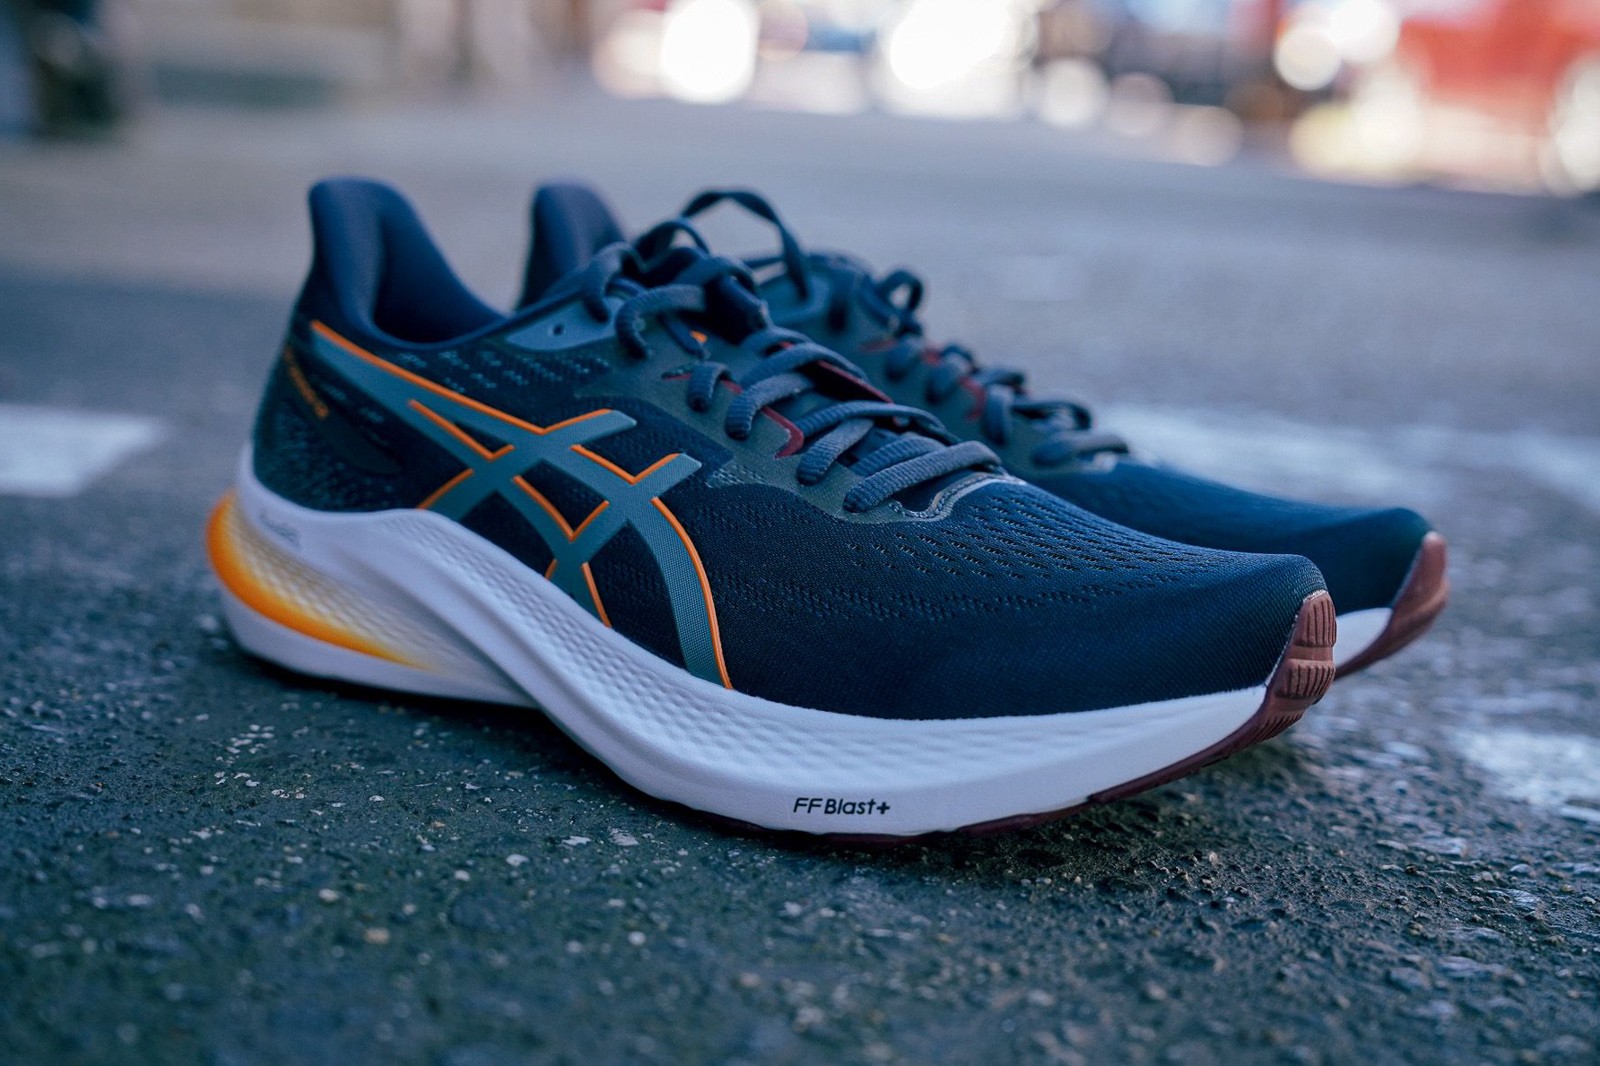 Asics GT-2000 12 Review: Ready, Steady, Reliable - Believe in the Run